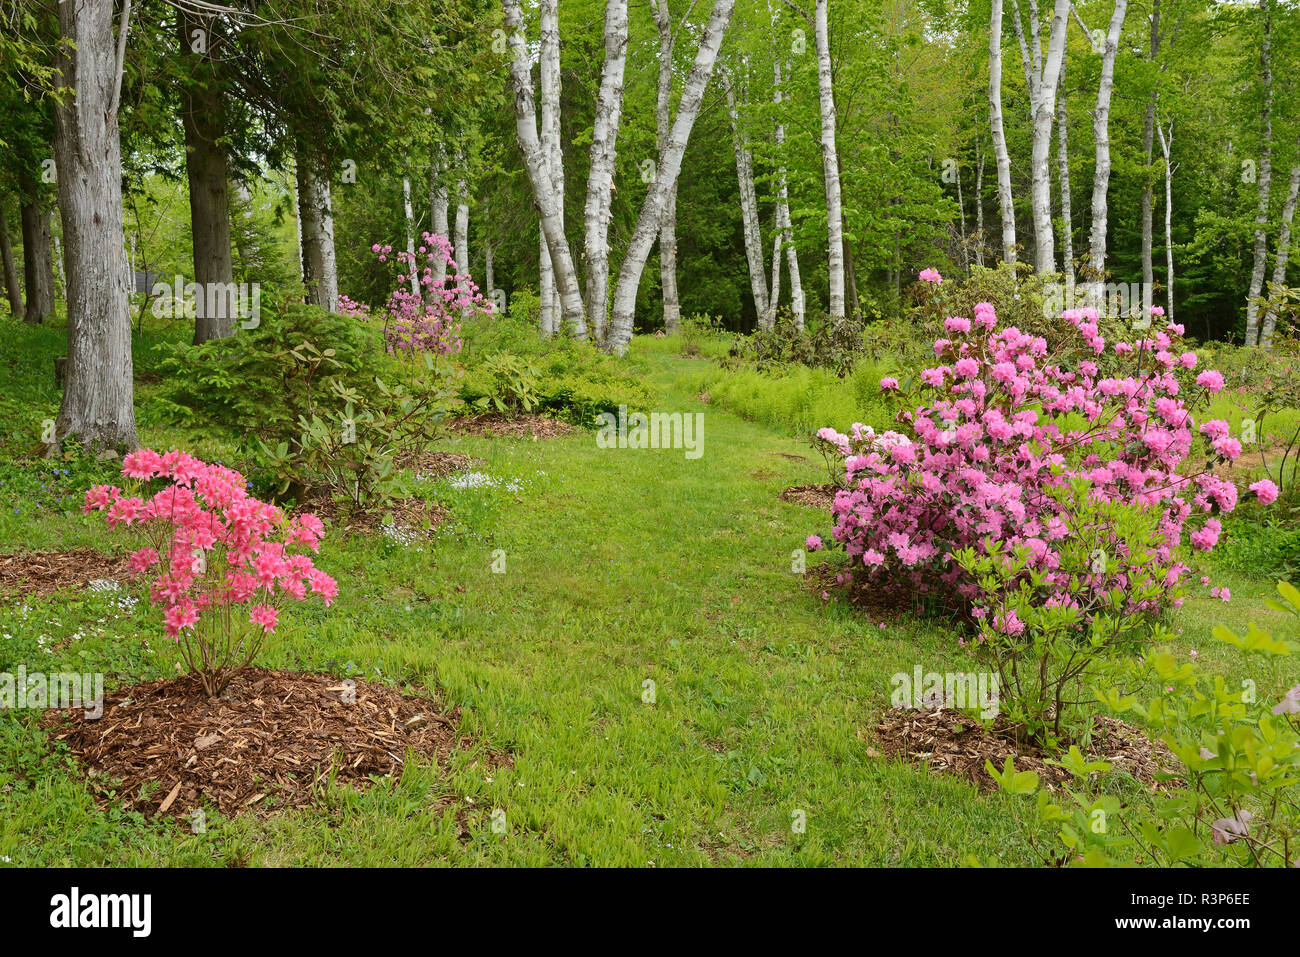 Canada, New Brunswick, Long Reach. Garden flowers and forest scenic. Stock Photo